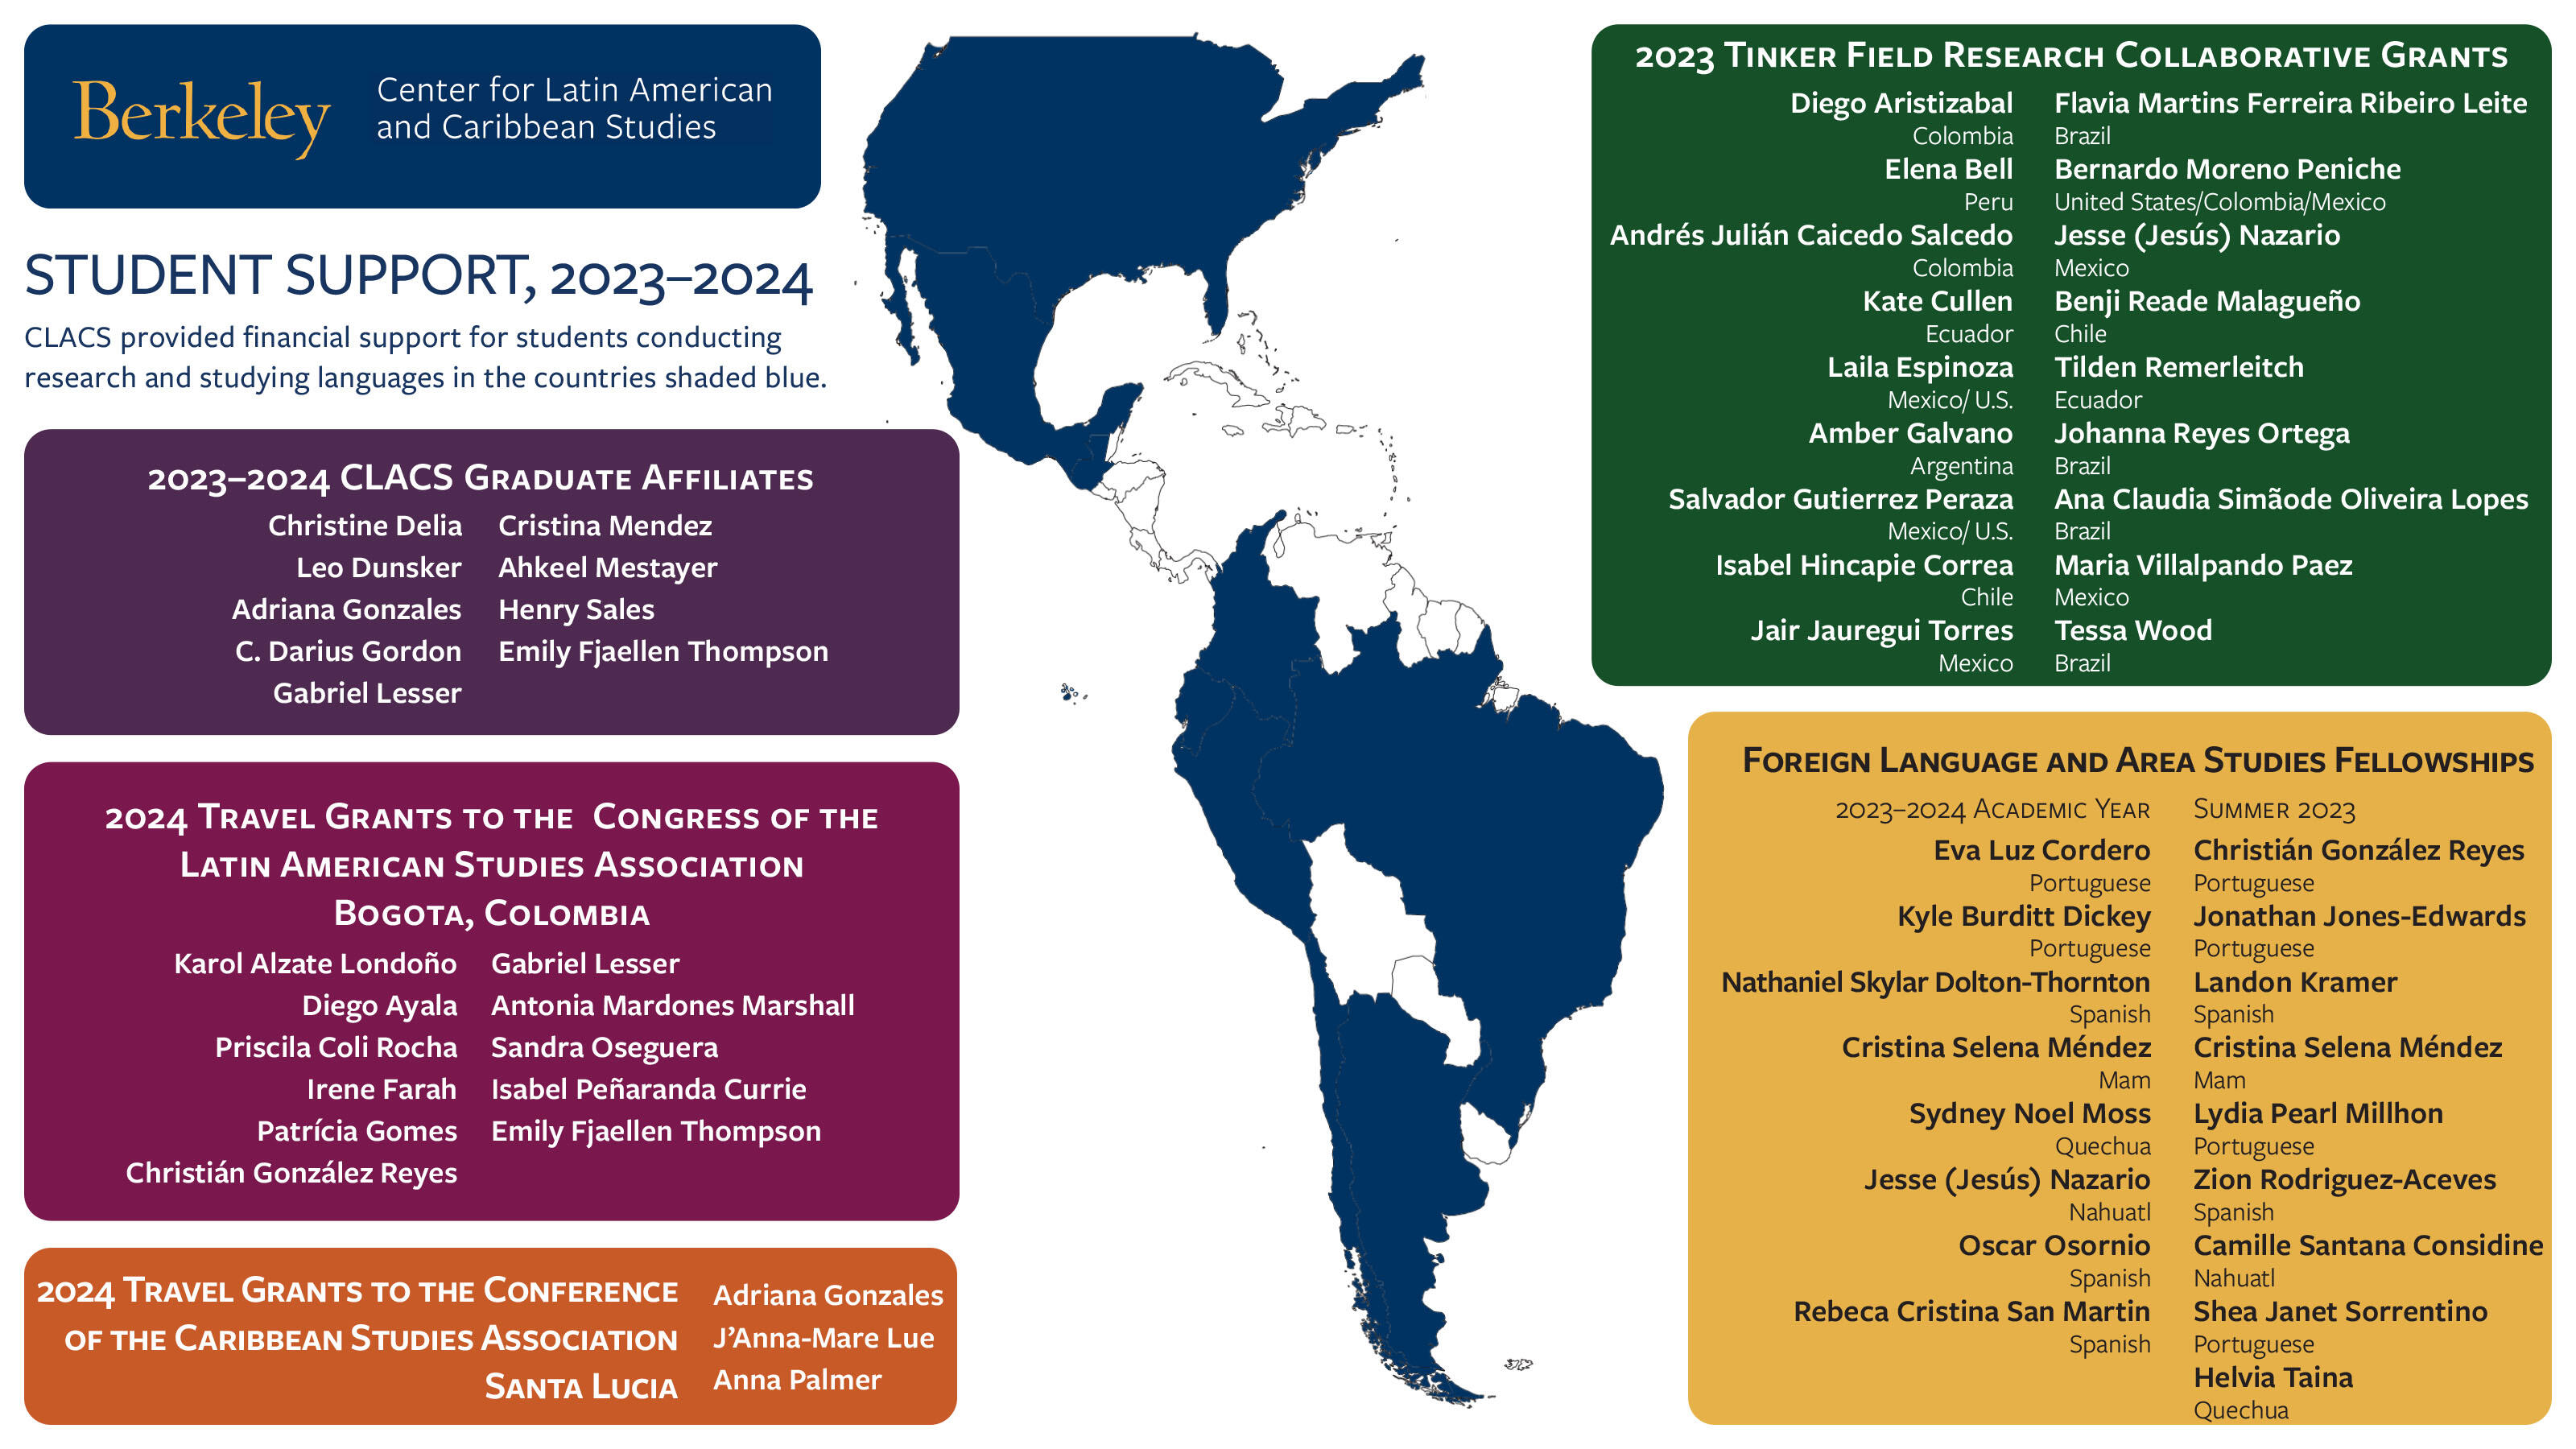 A list of students supported by CLACS in research, language learning and professional development in 2023-24, with a map of the Americas showing where they were working.